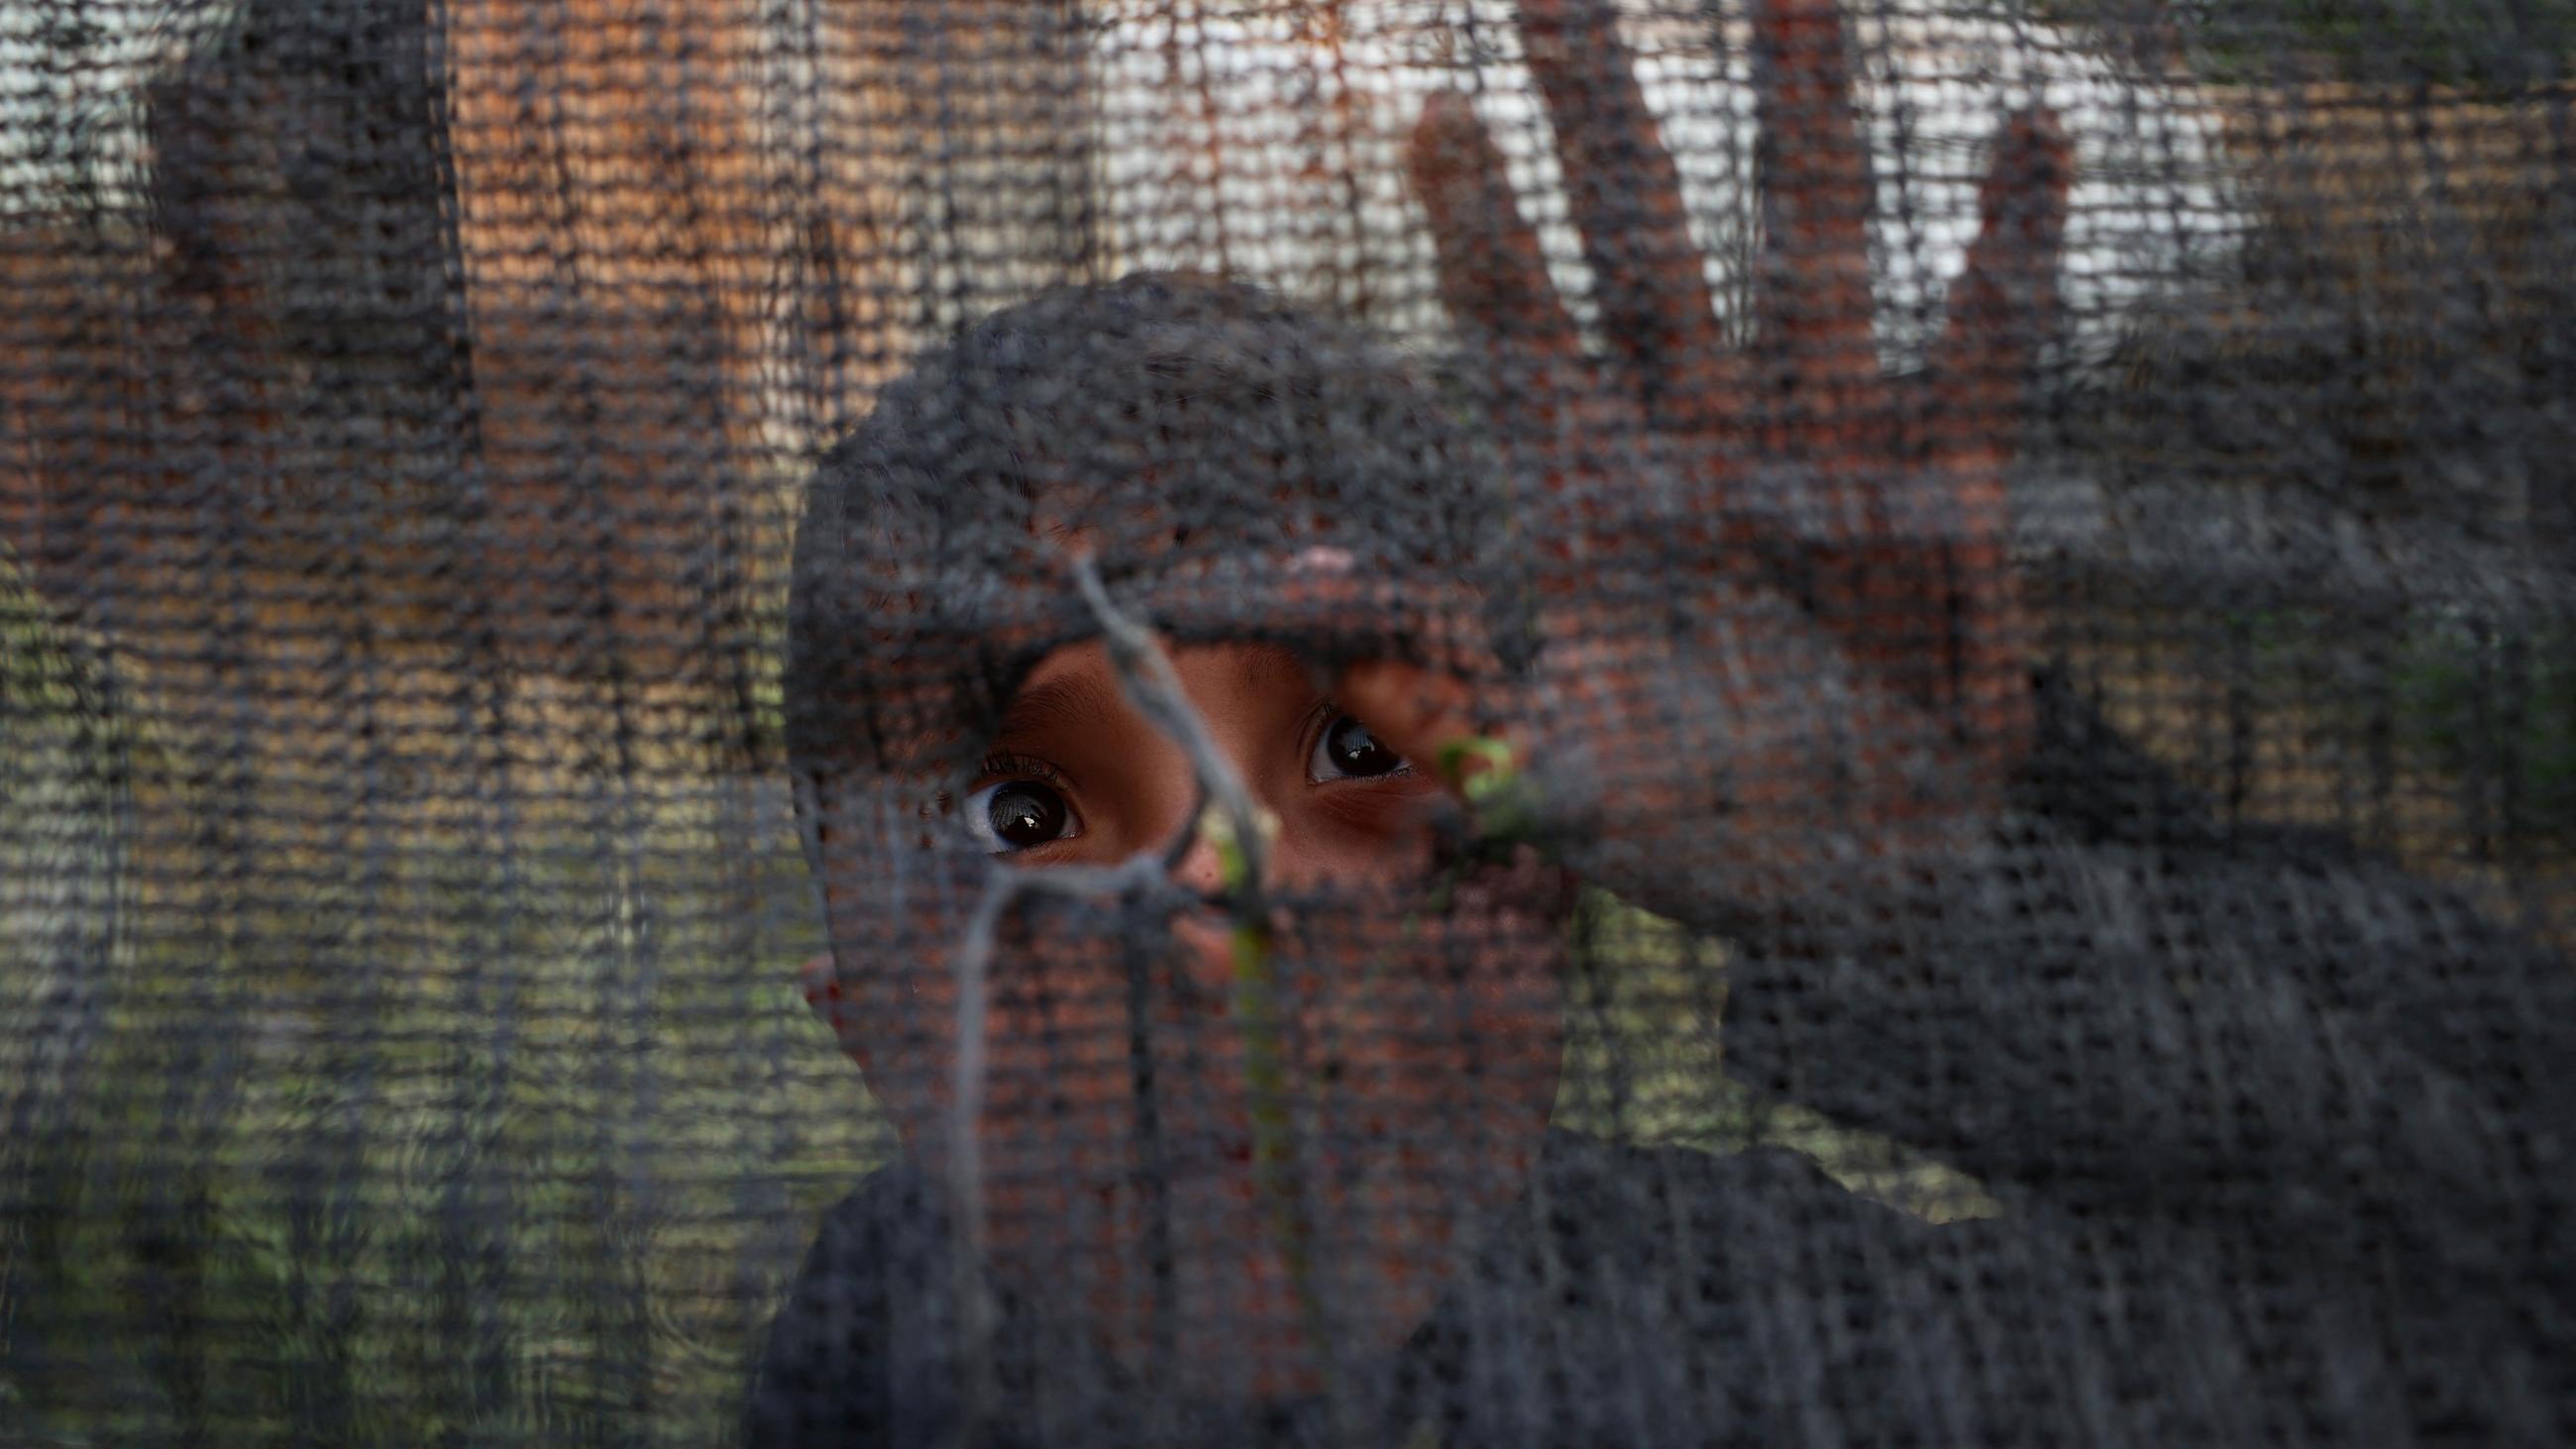 A Palestinian boy peeks out from a hole in a fence near al-Bureij in the Gaza Strip on 7 April 2022 (AFP)